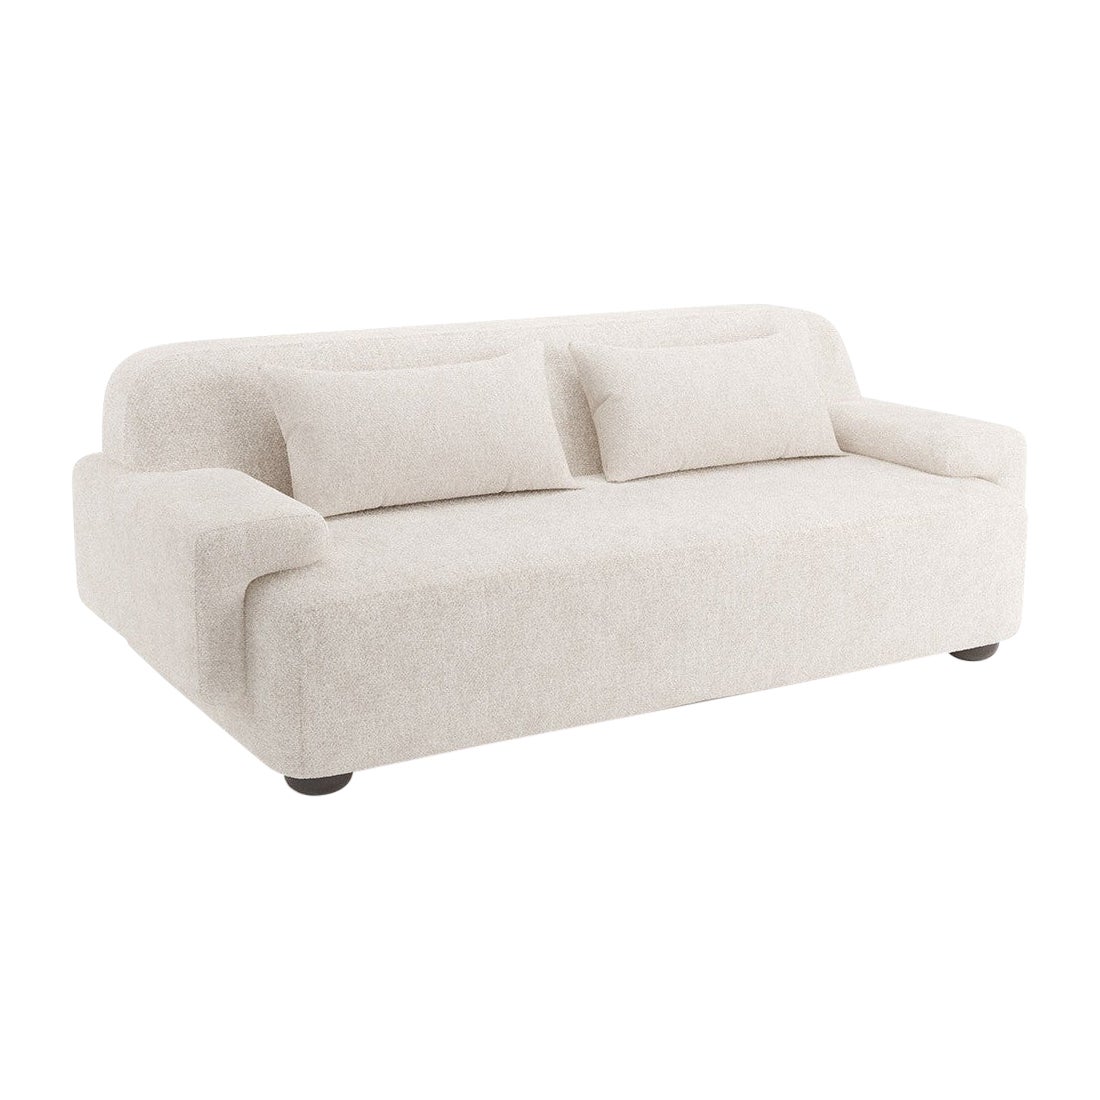 Popus Editions Lena 3 Seater Sofa in Gray Antwerp Linen Upholstery For Sale